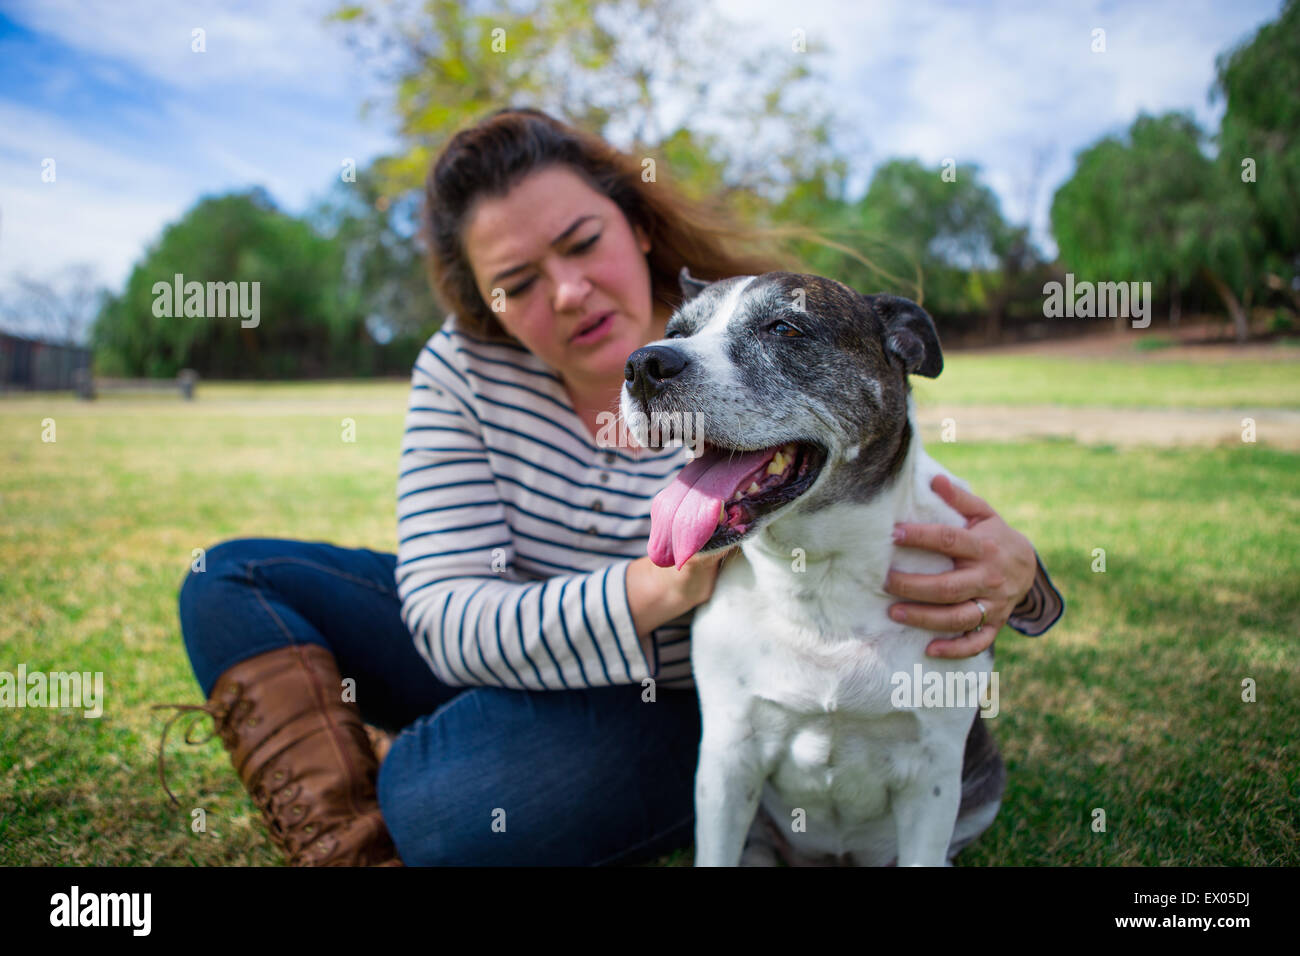 Young woman petting old dog in park Banque D'Images